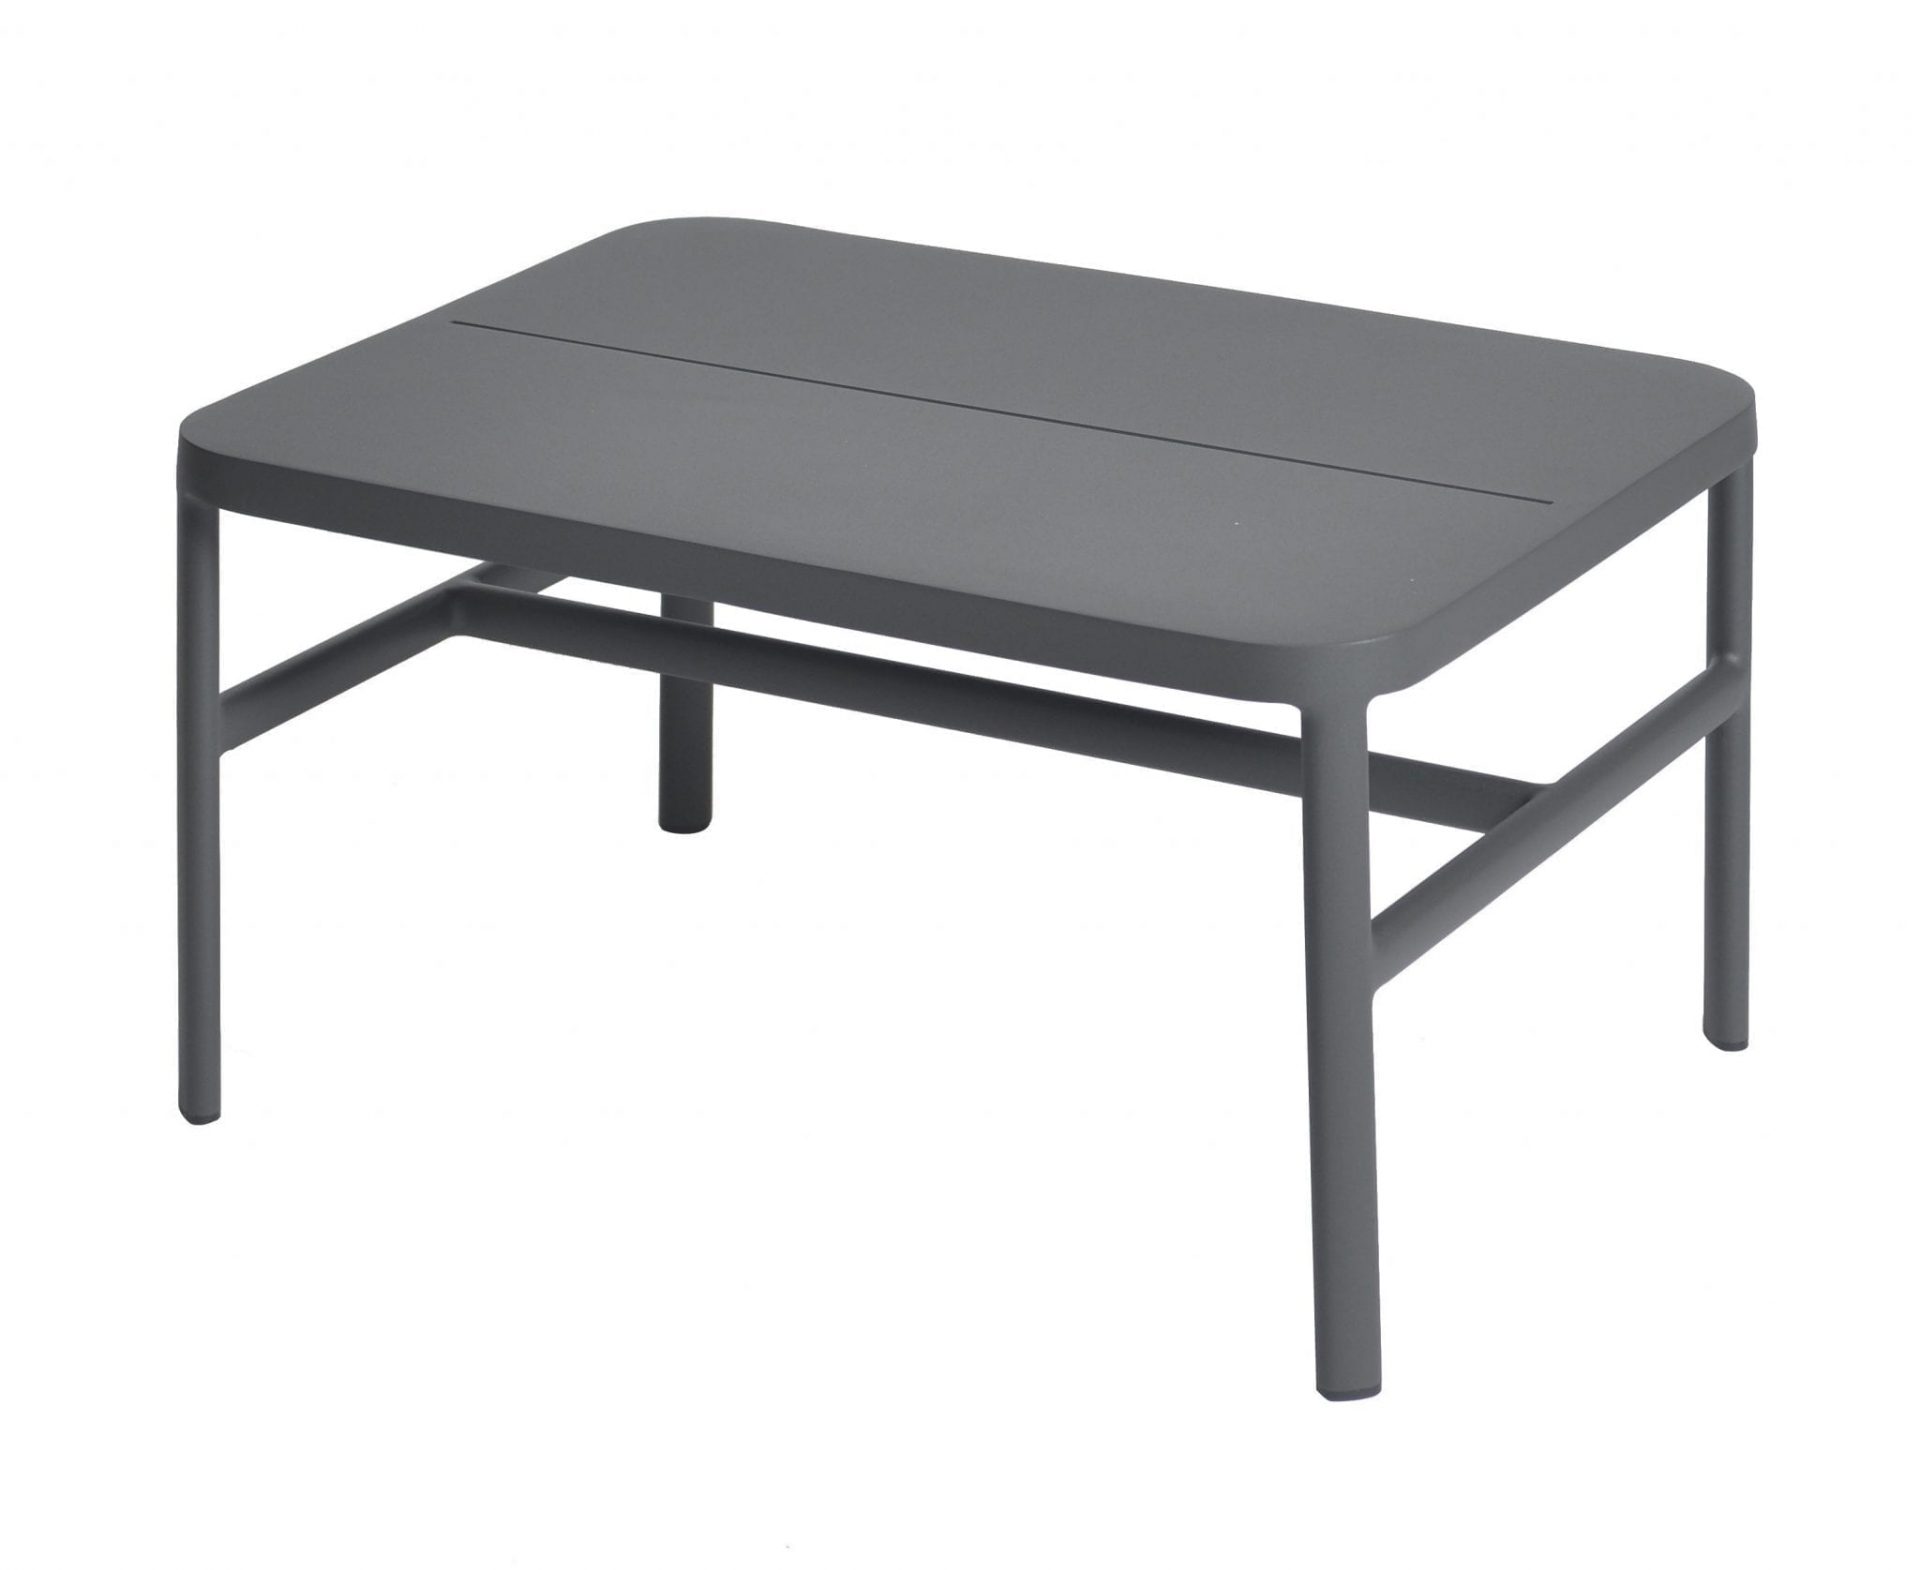 products-max_luuk_grace_coffee_table_ottoman_m2005_anthracite-1920x1570